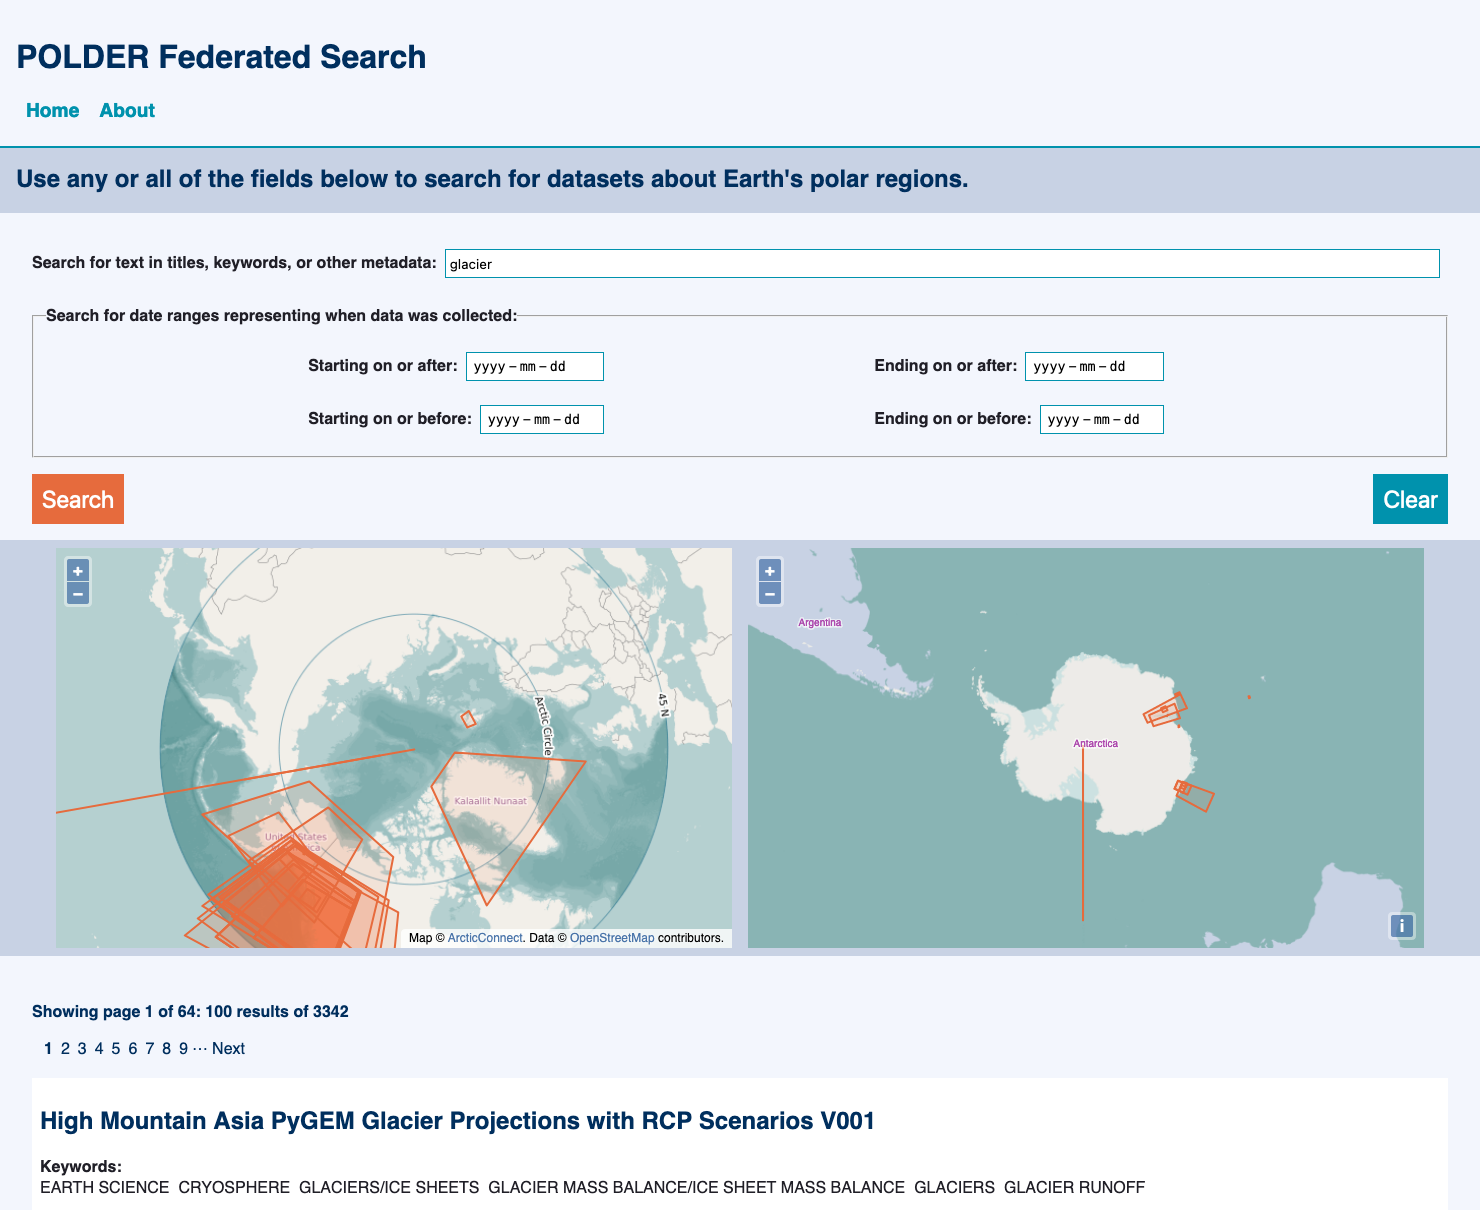 Joining The POLDER Federated Search – February 7, 2023